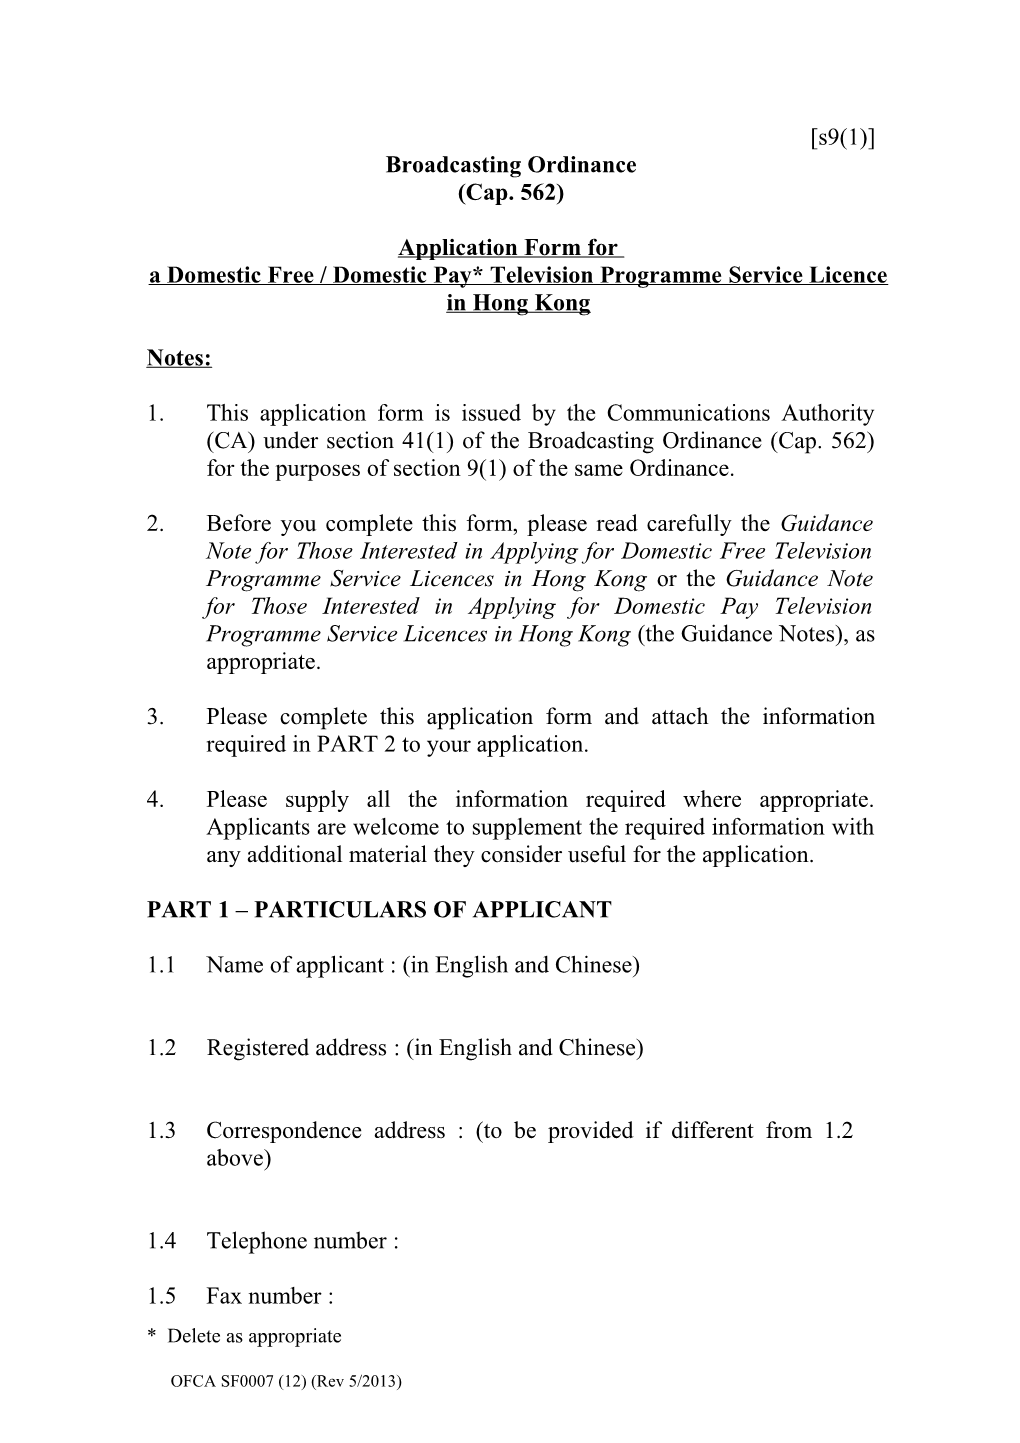 A Domestic Free / Domestic Pay* Television Programme Service Licence in Hong Kong